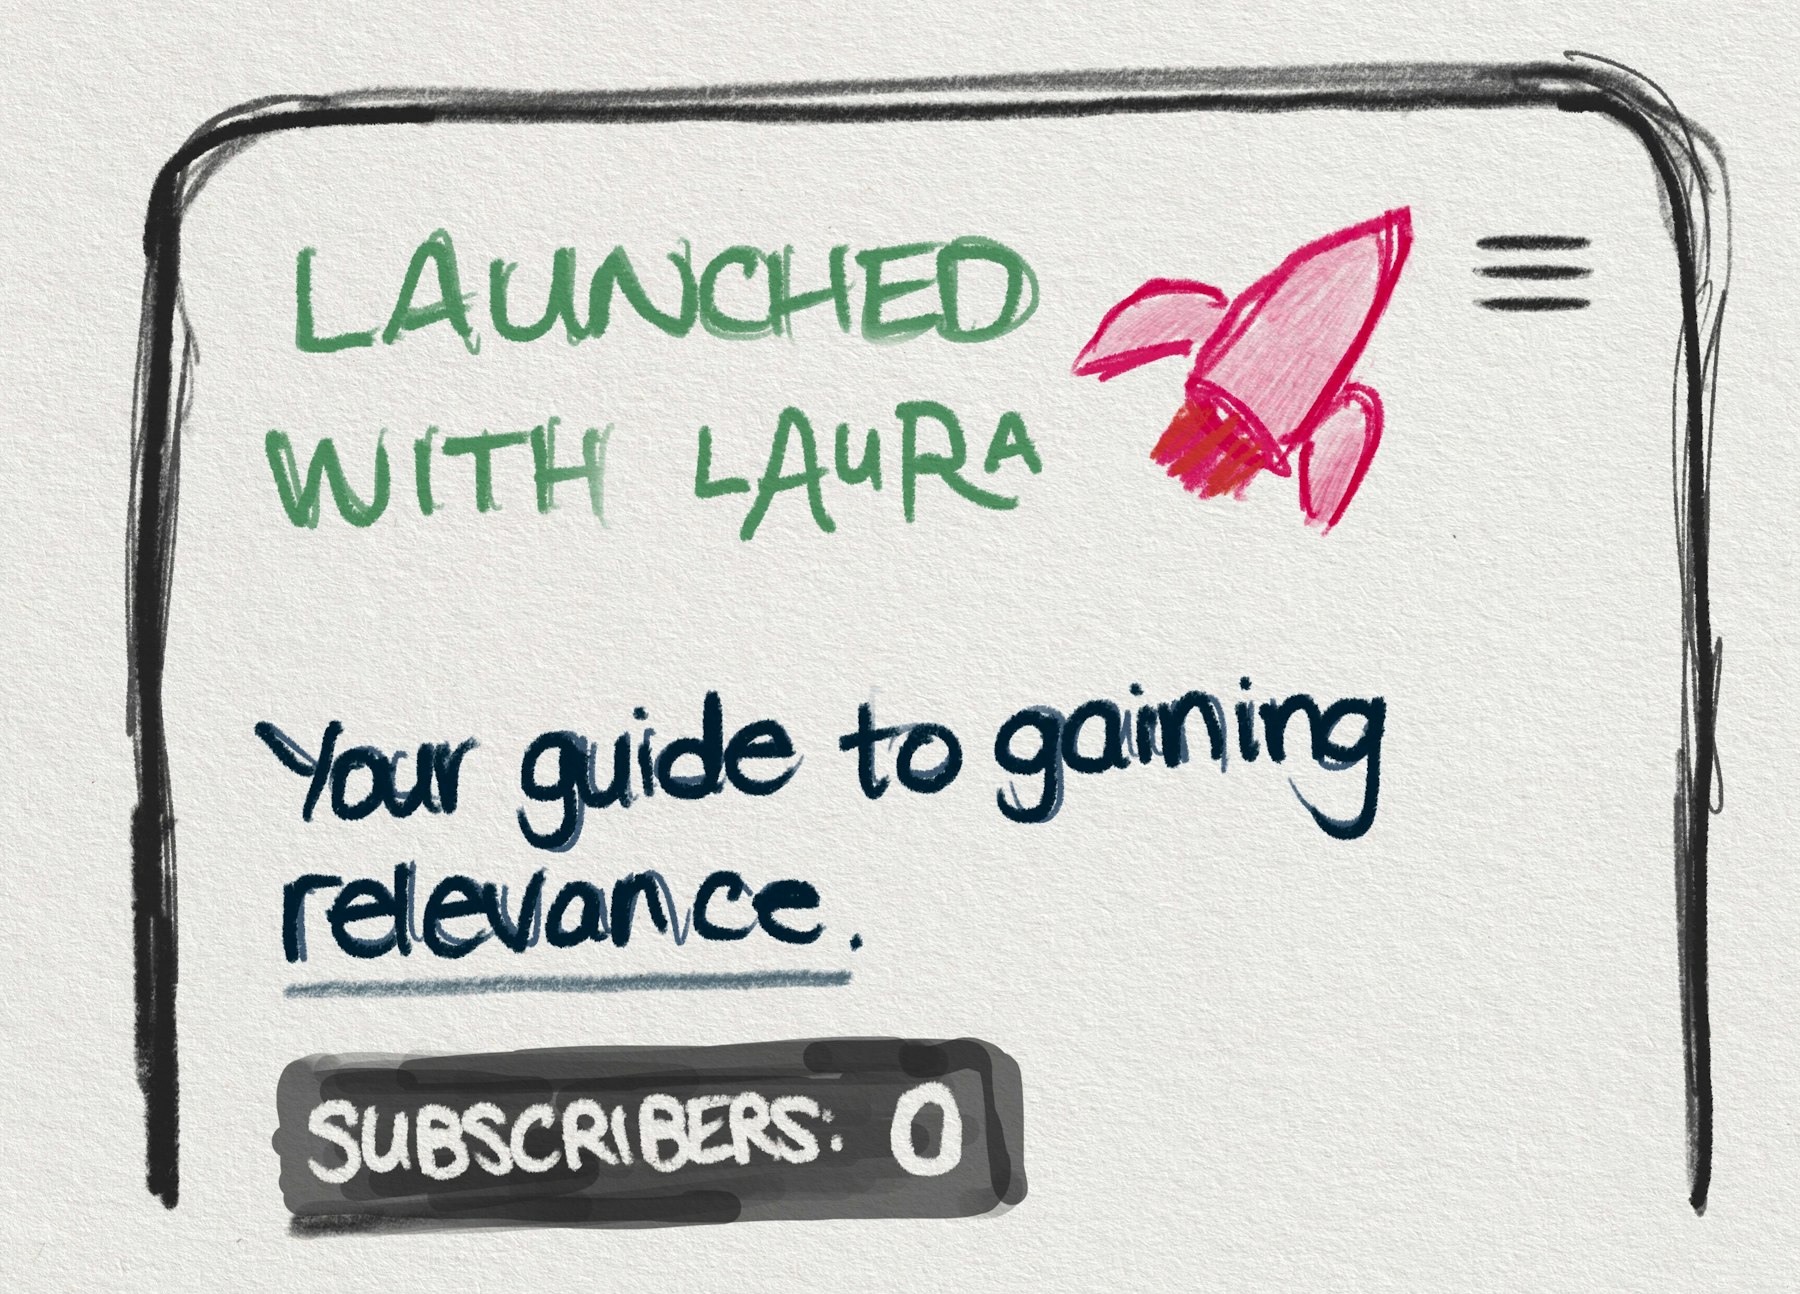 A picture of the Launched With Laura landing page with zero subscribers.